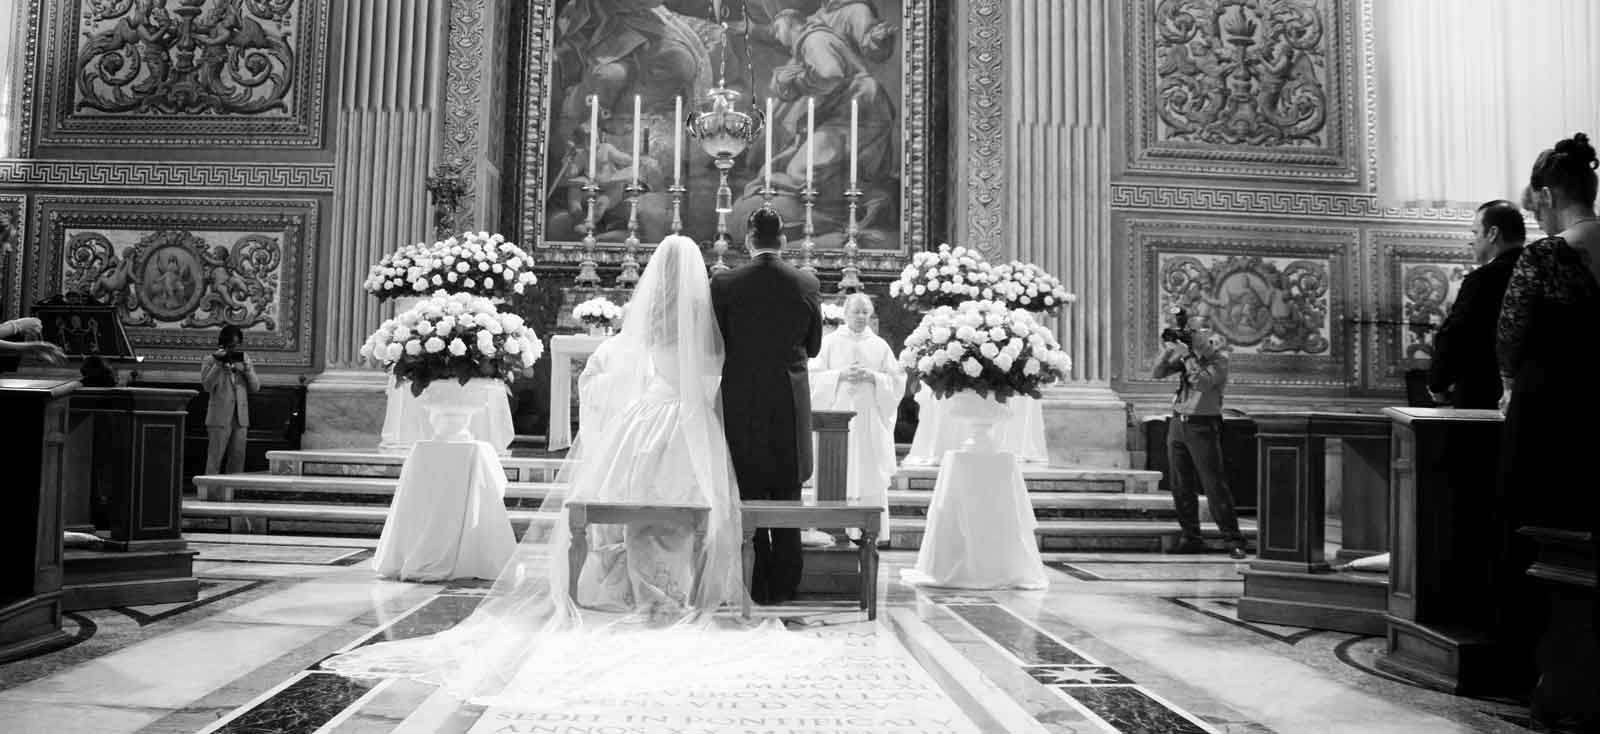 Lasting Marriages are built on Trust | Catholic Life - The Roman Catholic  Diocese of La Crosse